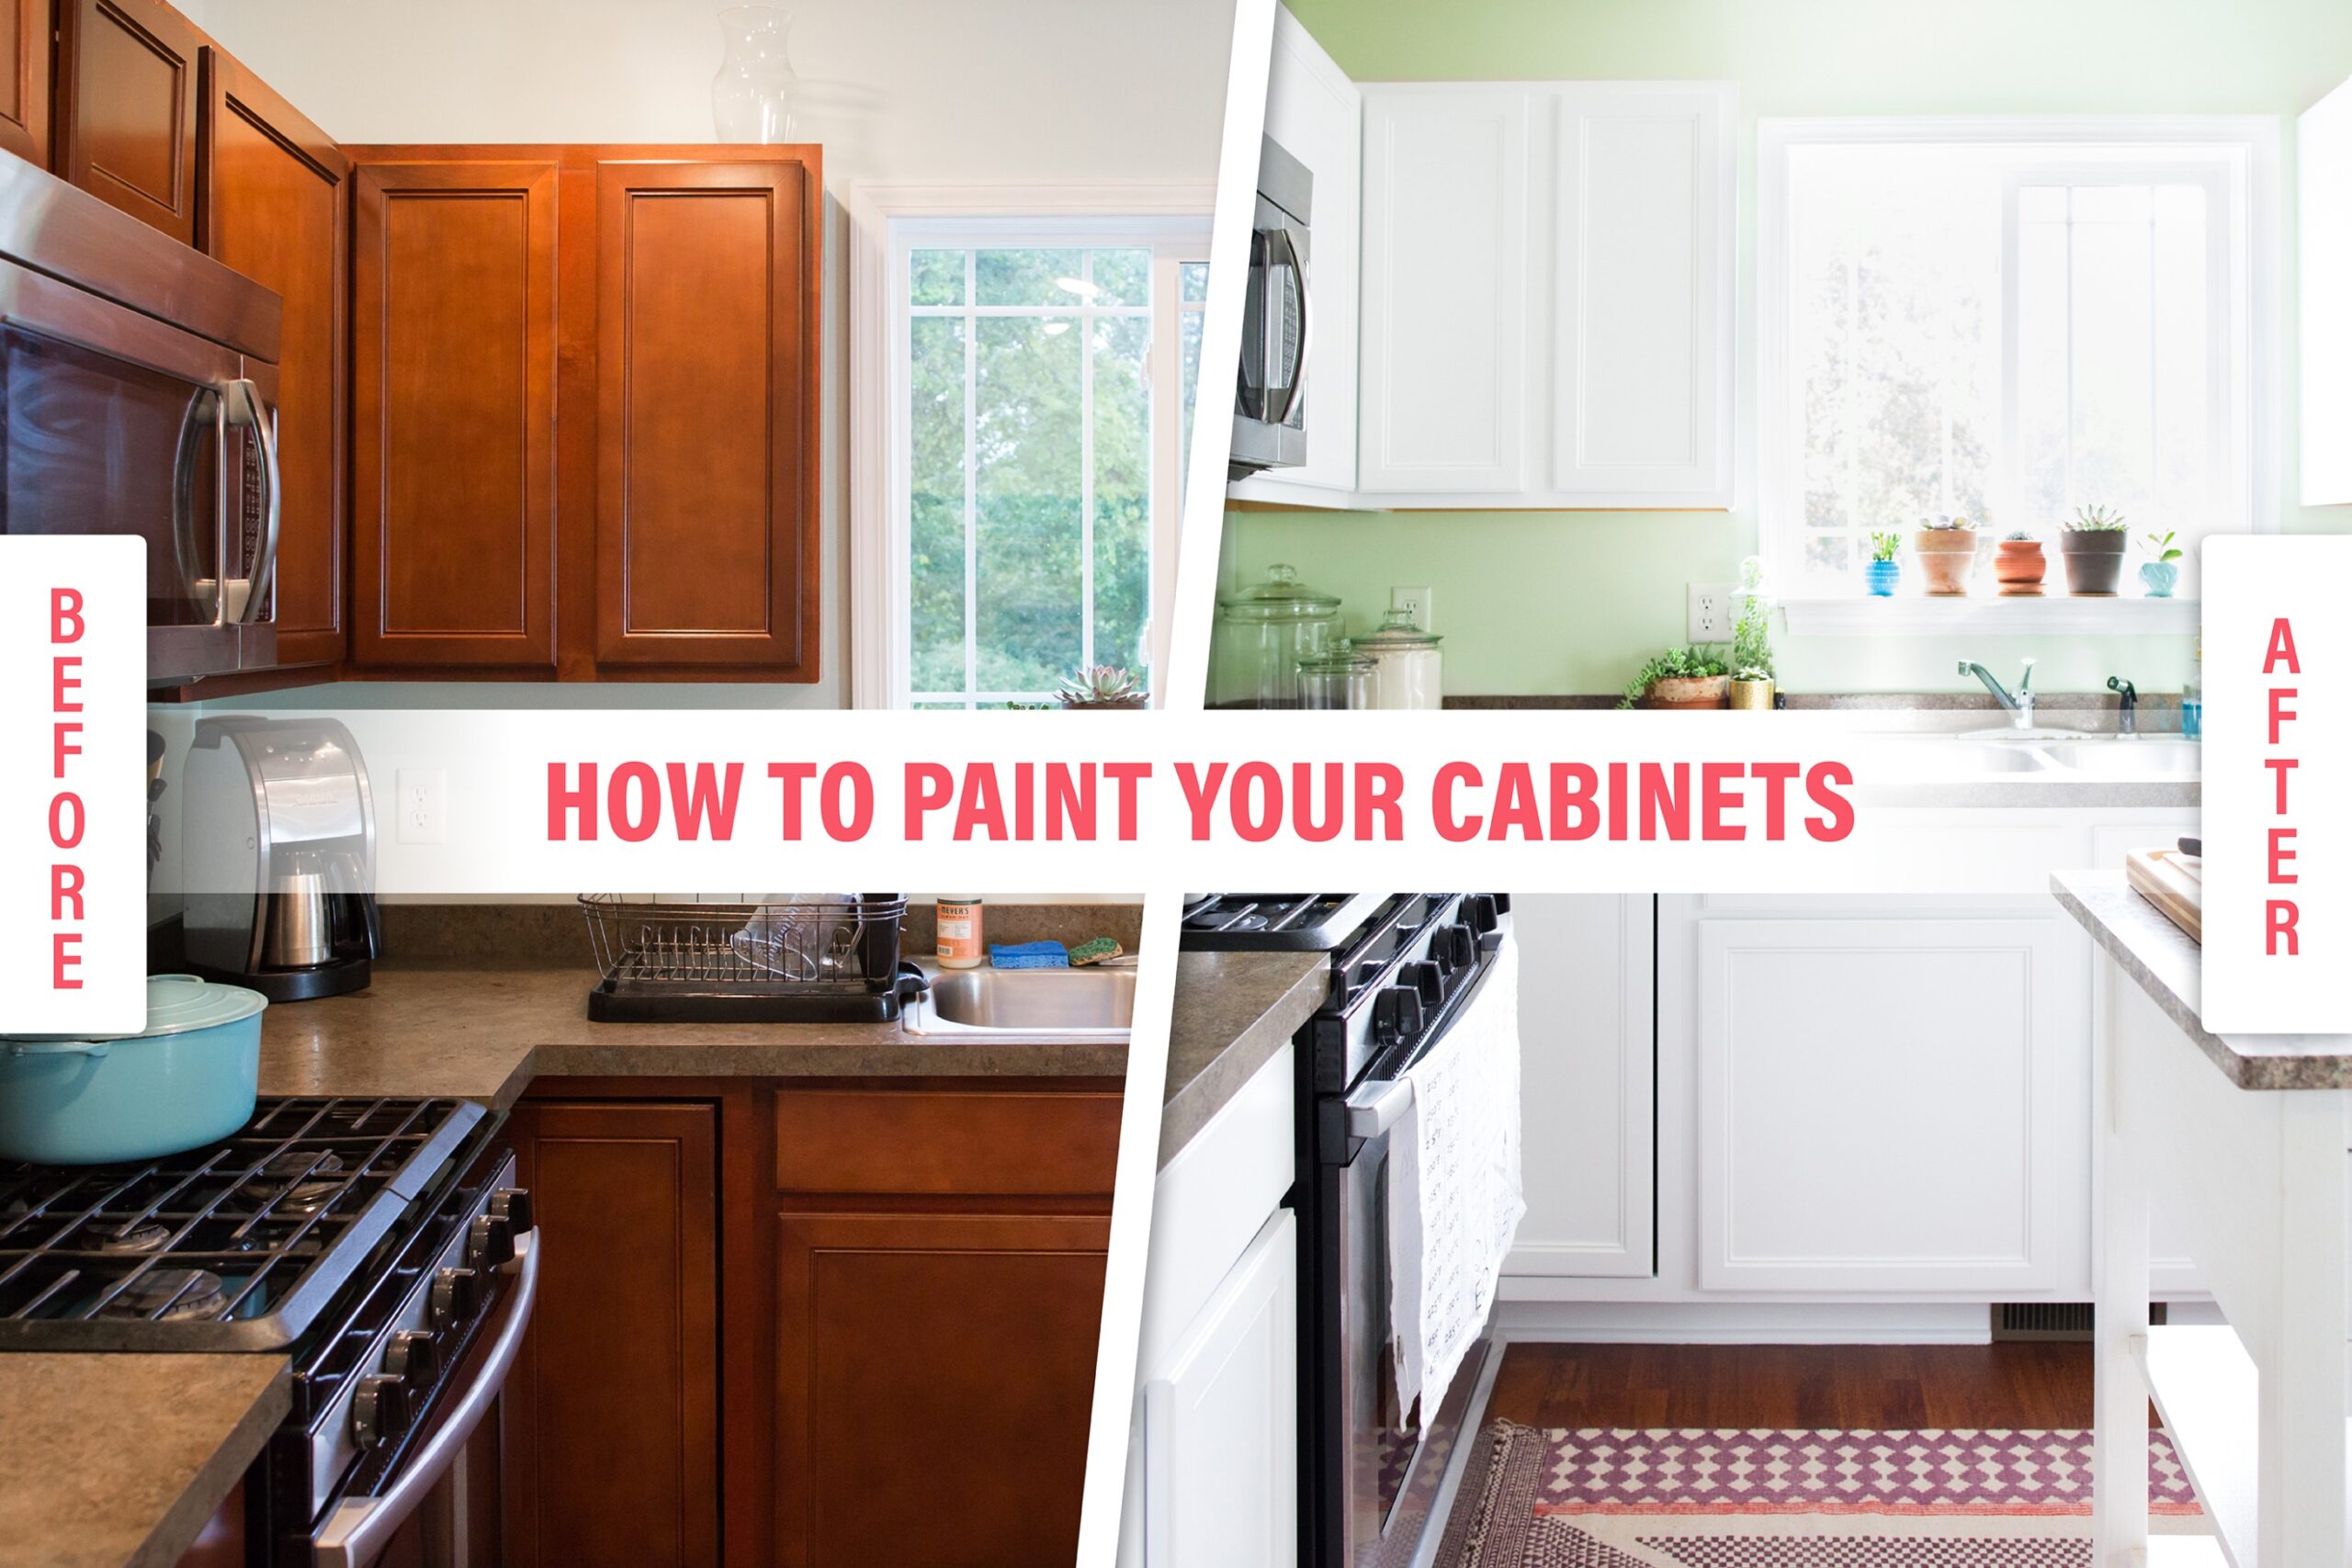 How To Paint Wood Kitchen Cabinets with White Paint  Kitchn - wood kitchen units